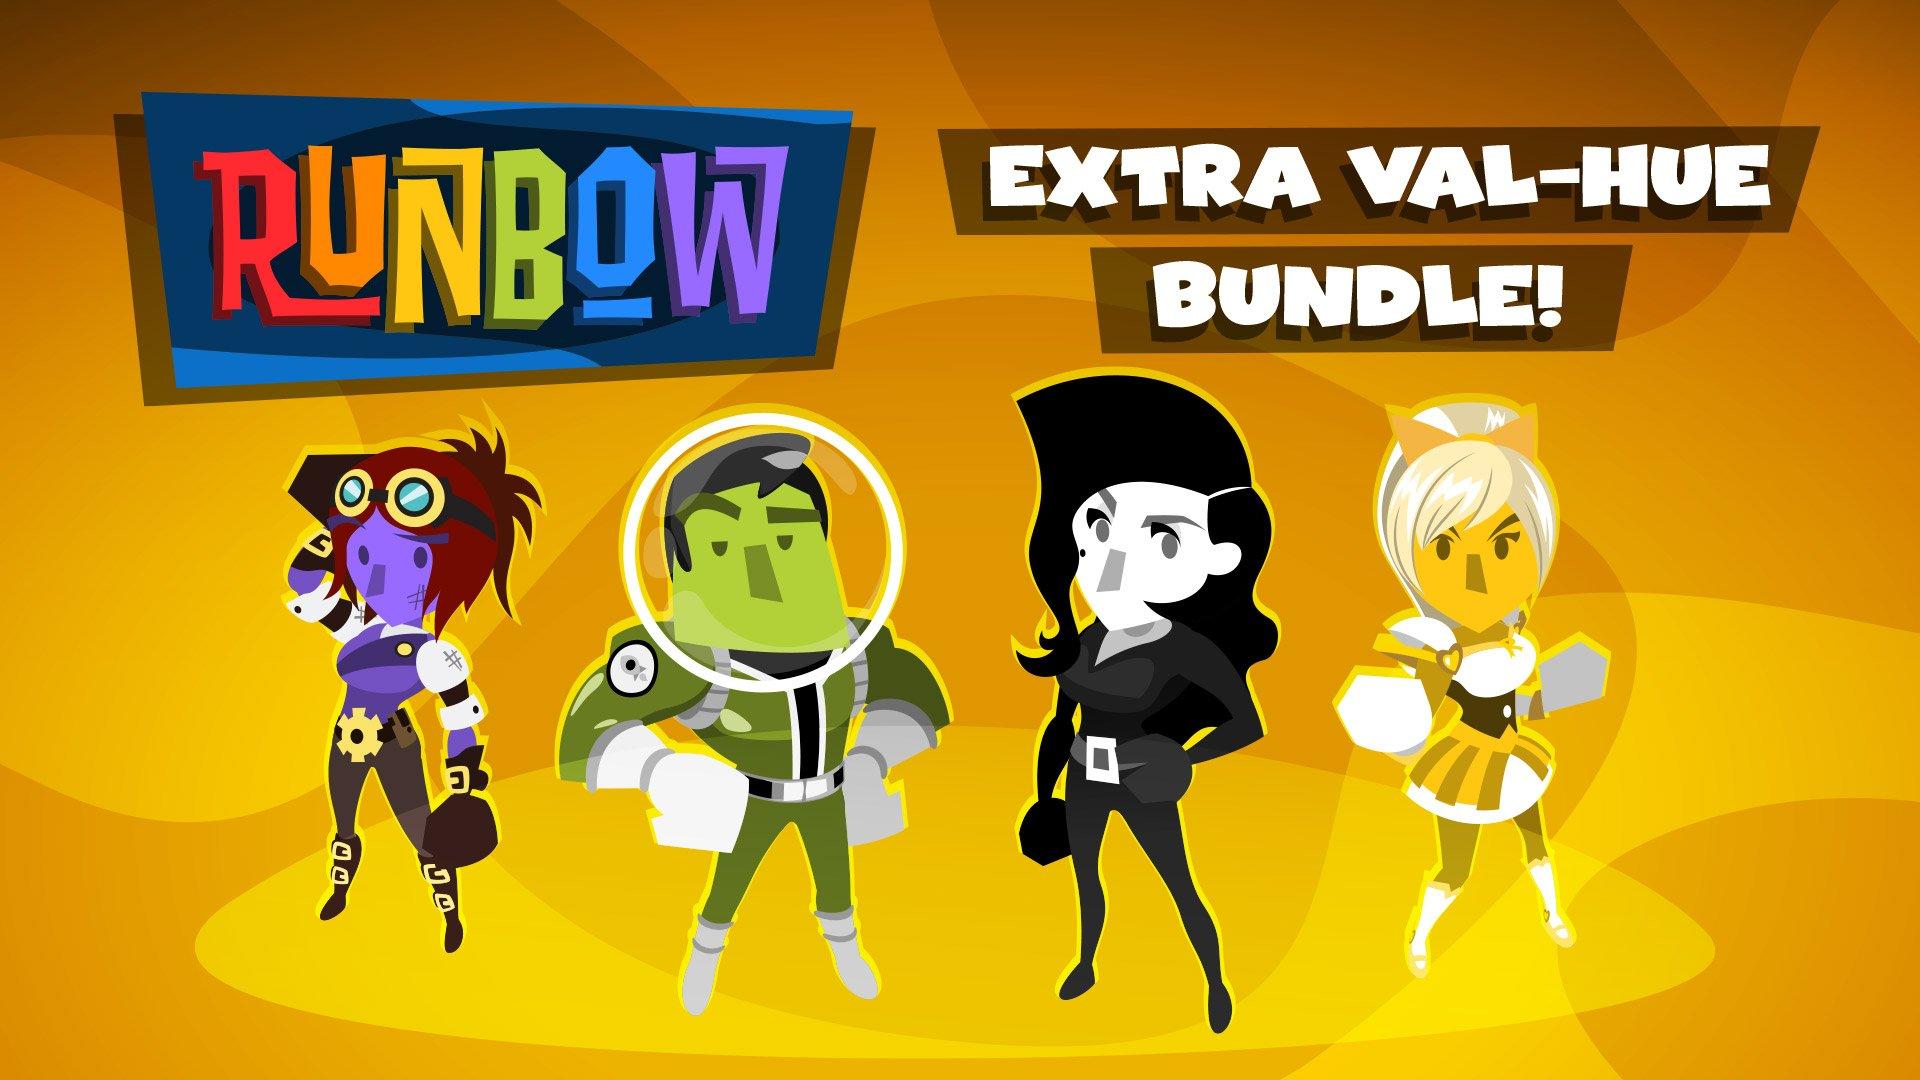 Runbow Extra Val-Hue Bundle - Nintendo Switch